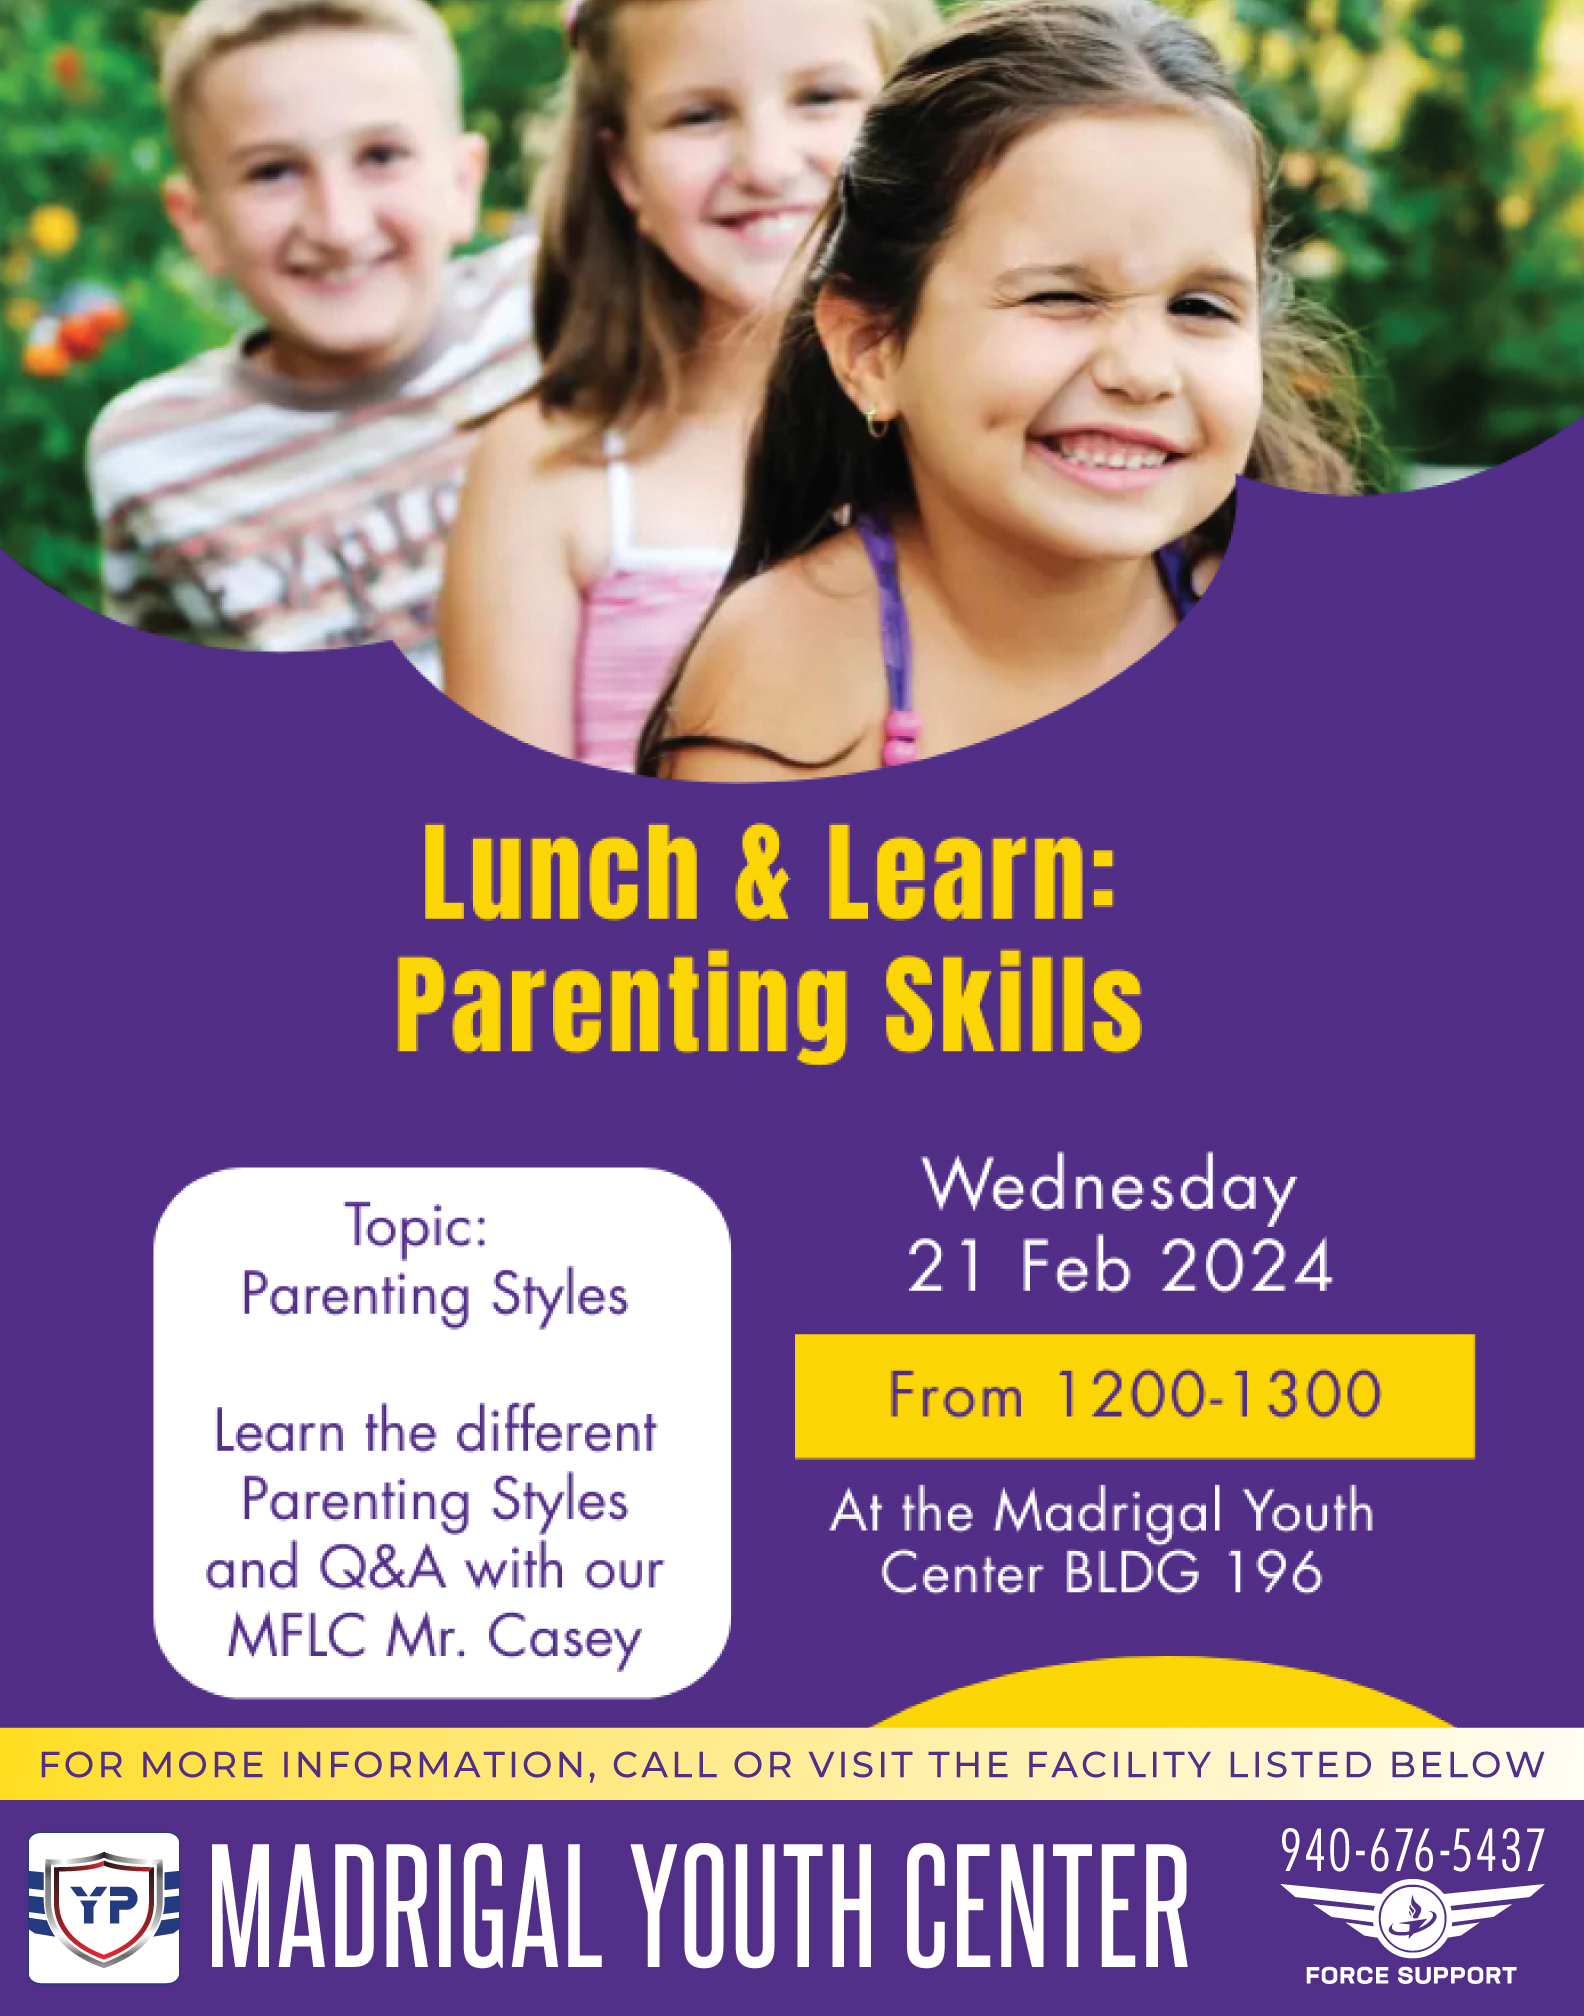 Lunch & Learn: Parenting Skills